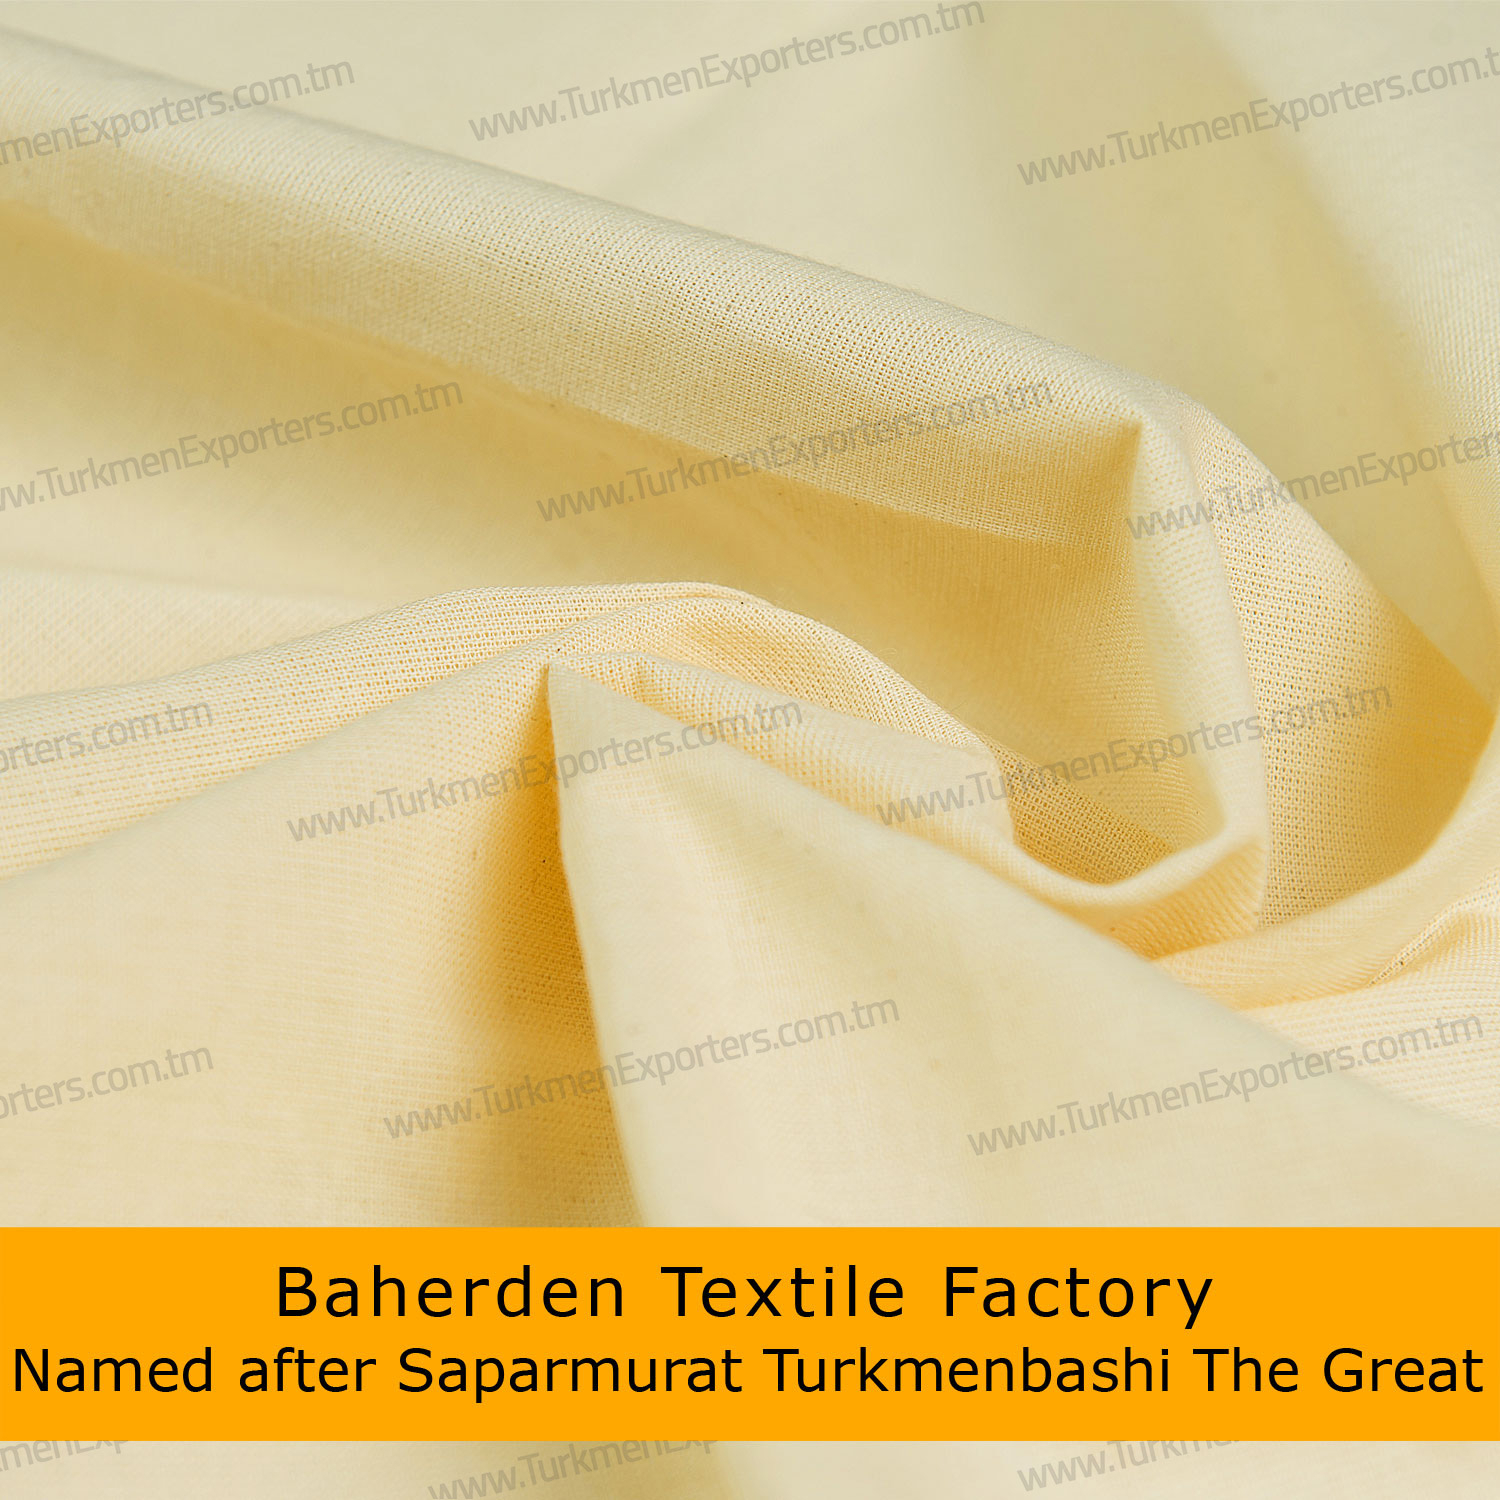 Flannel raw cotton fabric | Baherden textile factory named after Saparmurat Turkmenbashi the great